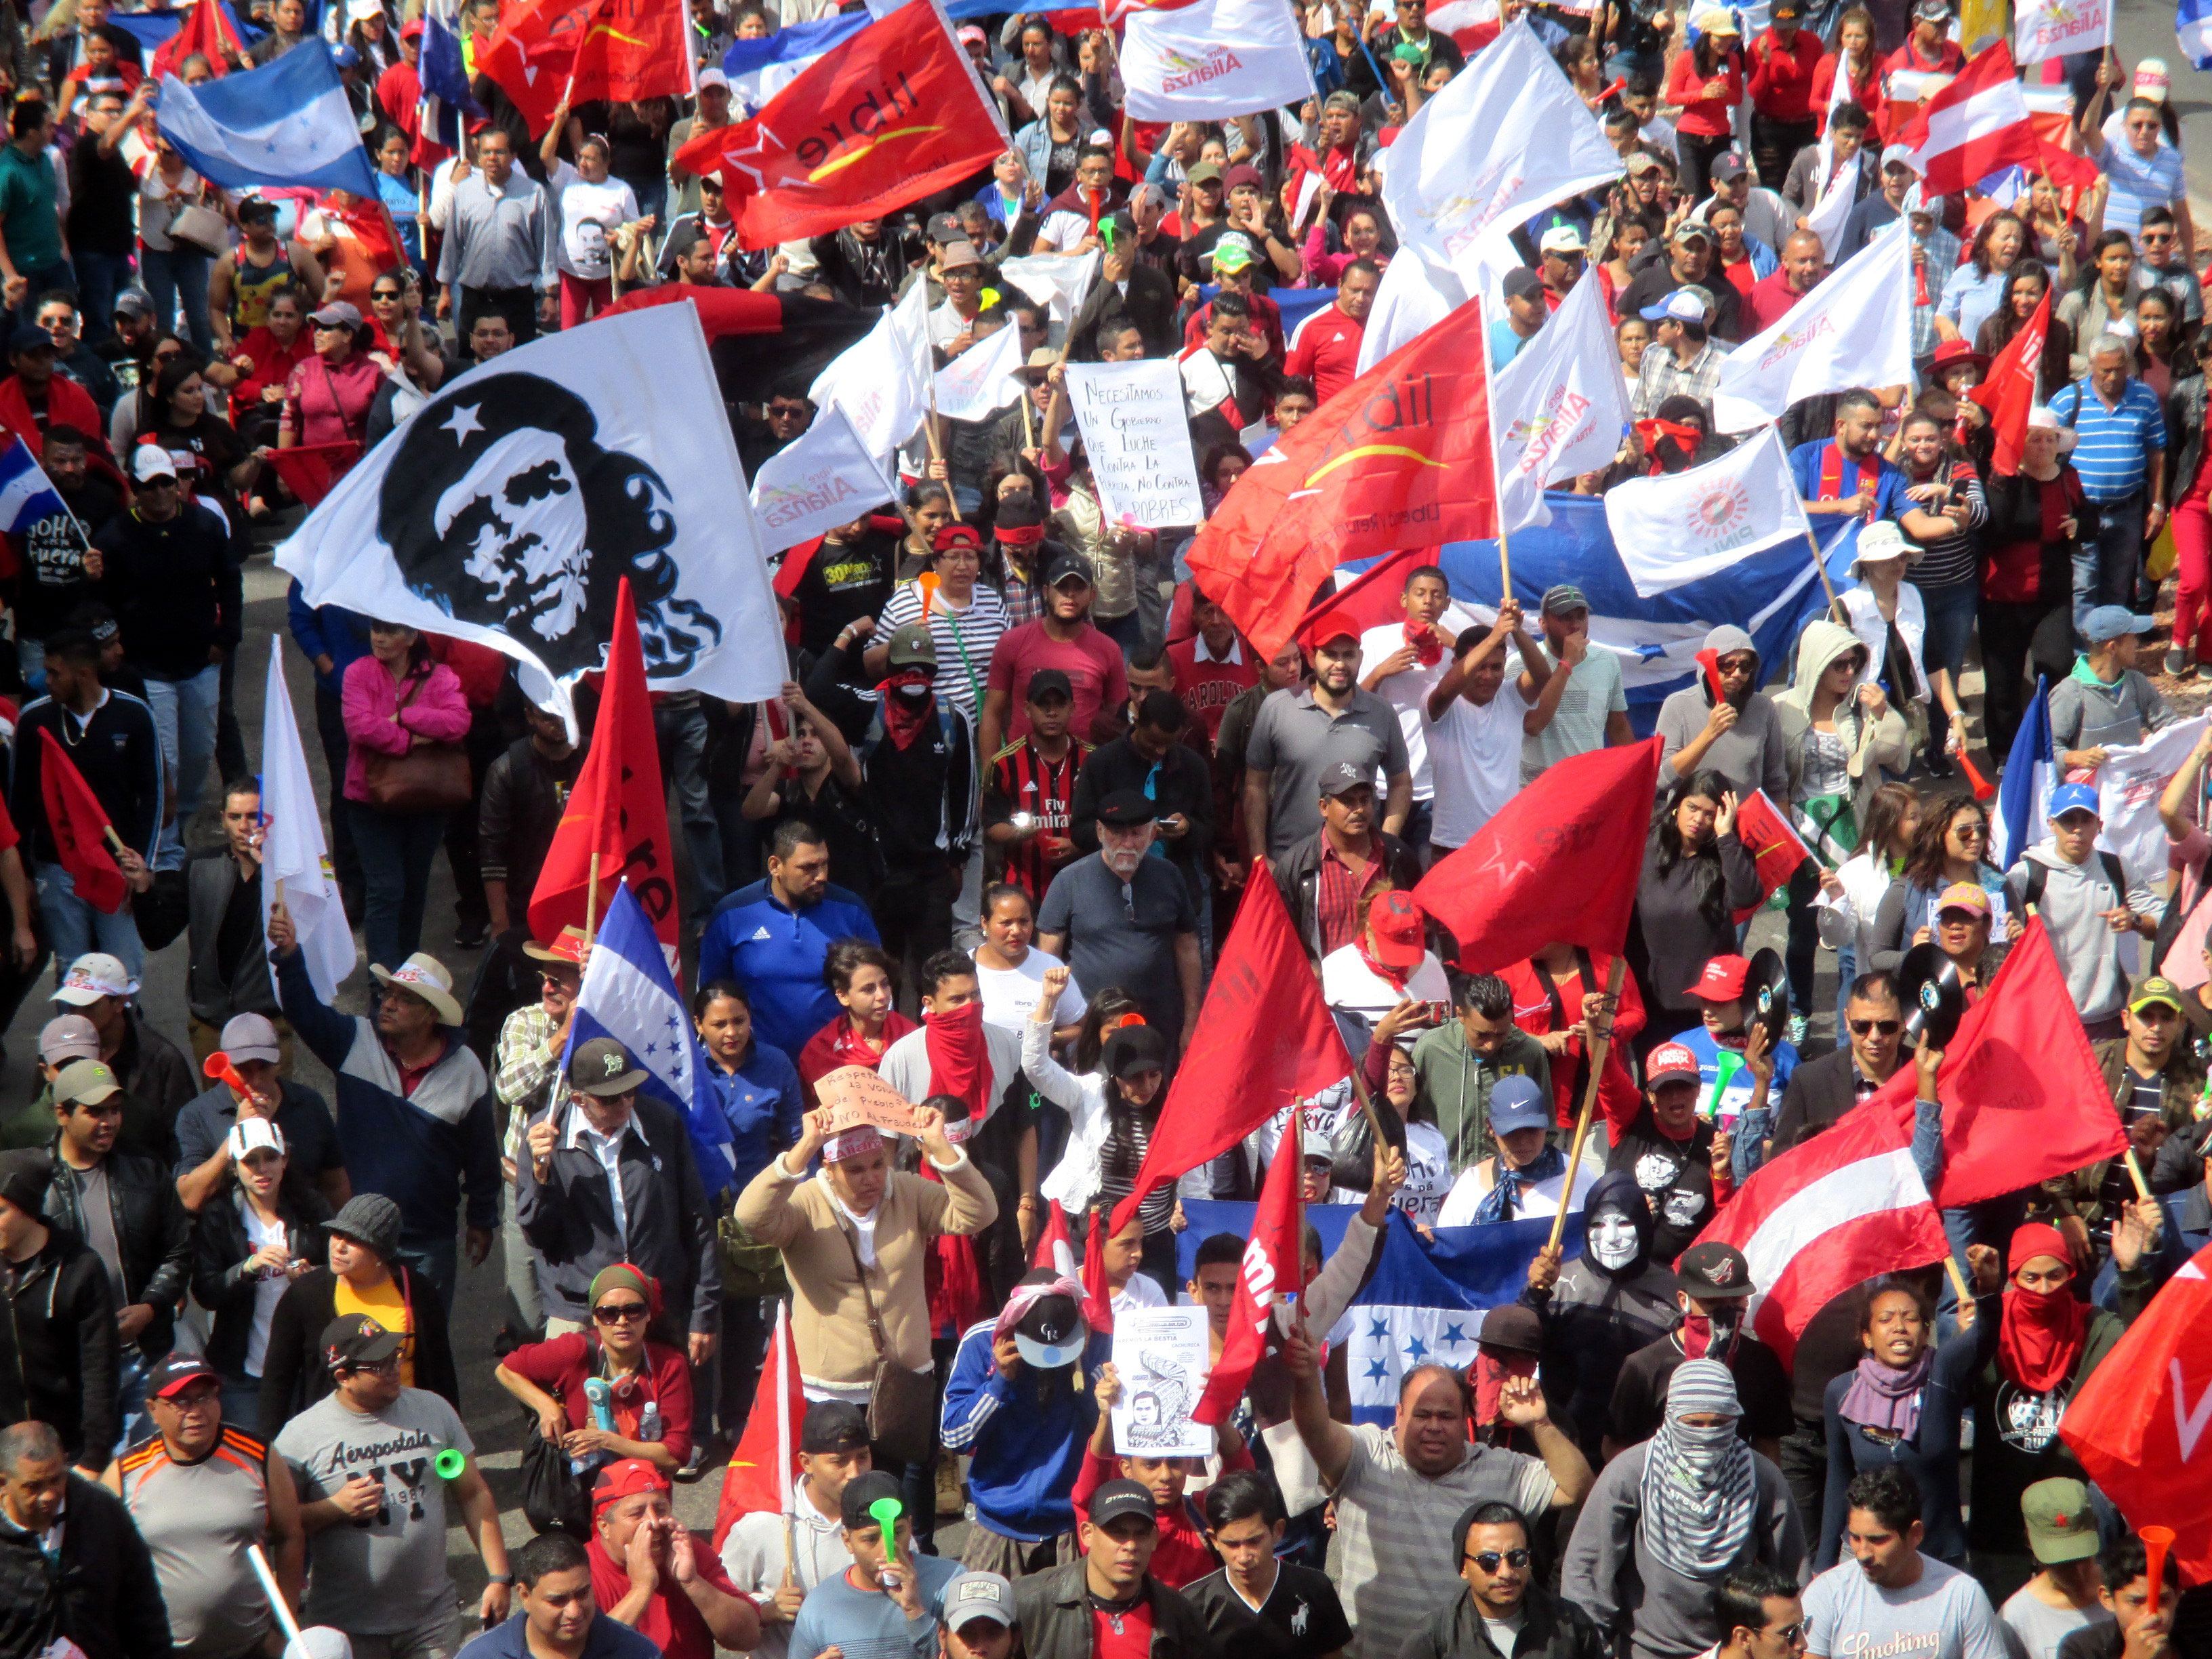 Thousands march through the Honduran capital in December 2017 to protest election fraud.